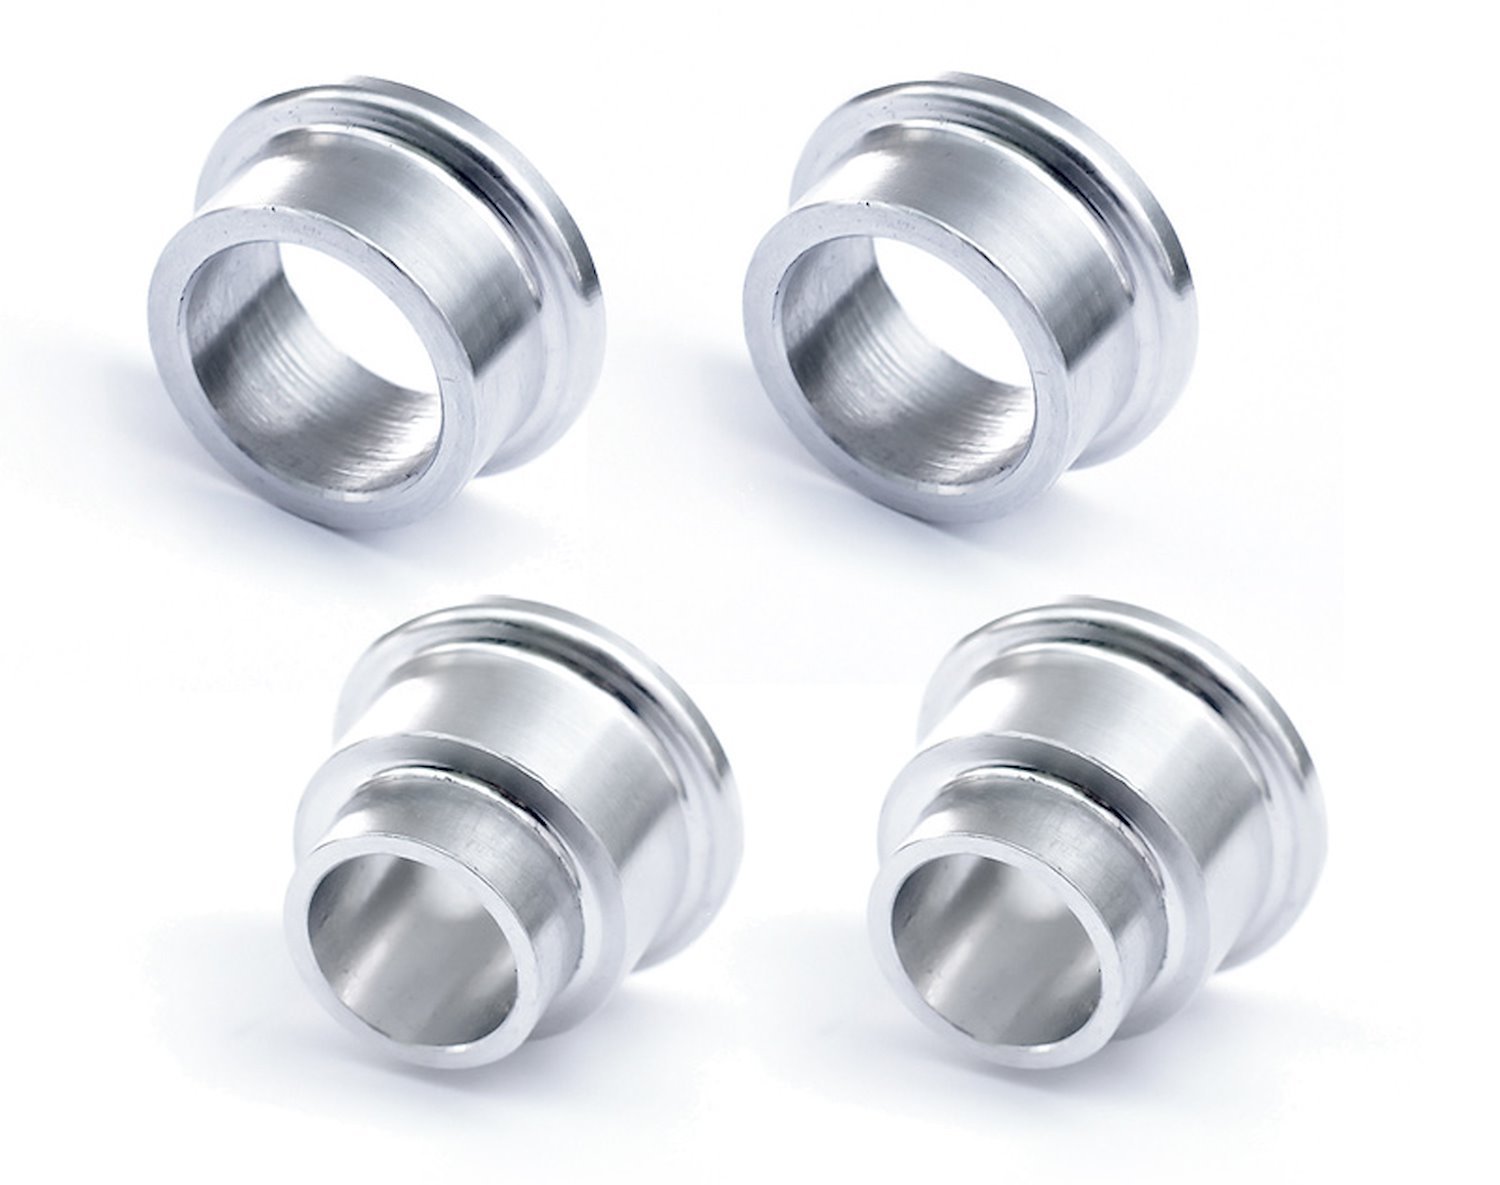 Bearing Spacer KIT. Includes Two .625 Spacers and Two .625 to .5 Adapter Bushings. Requires 1 KIT Per Bearing.